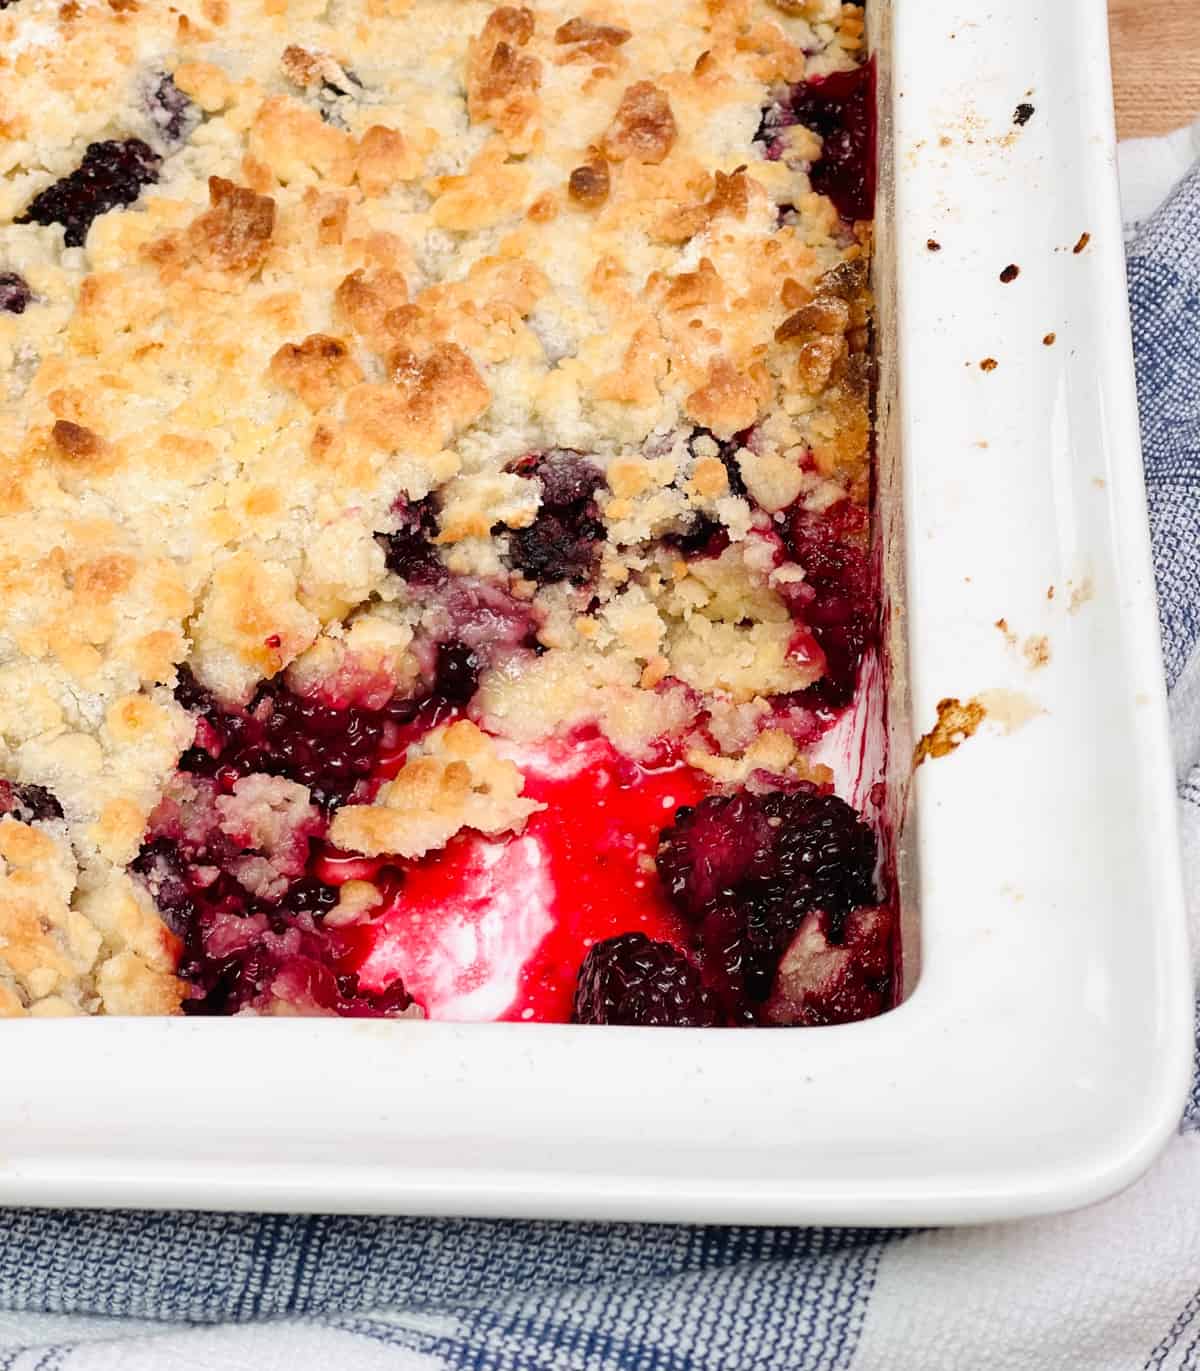 We Made Jennifer Garner’s Blackberry Cobbler And There’s a Reason Why It Went Viral